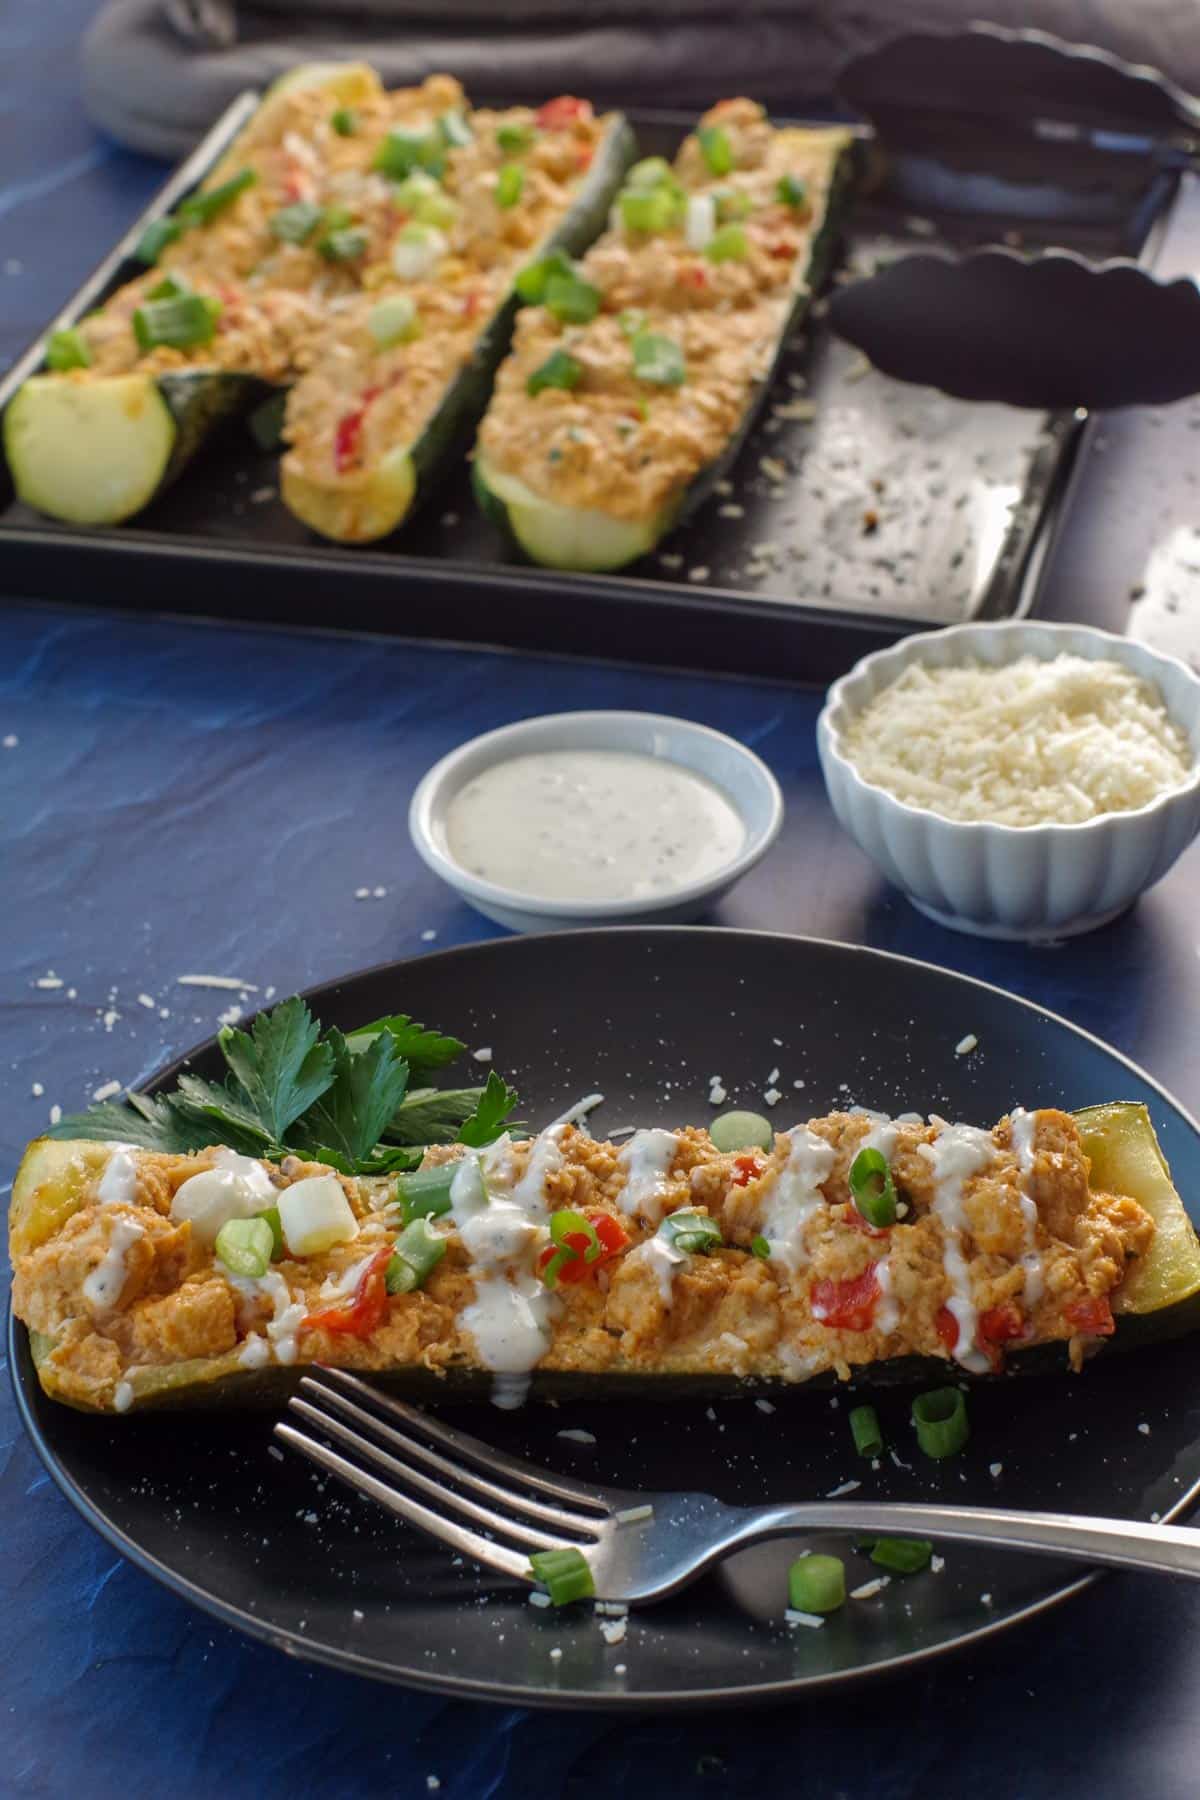 buffalo chicken zucchini boat on black plate with tray of zucchini boats in the background